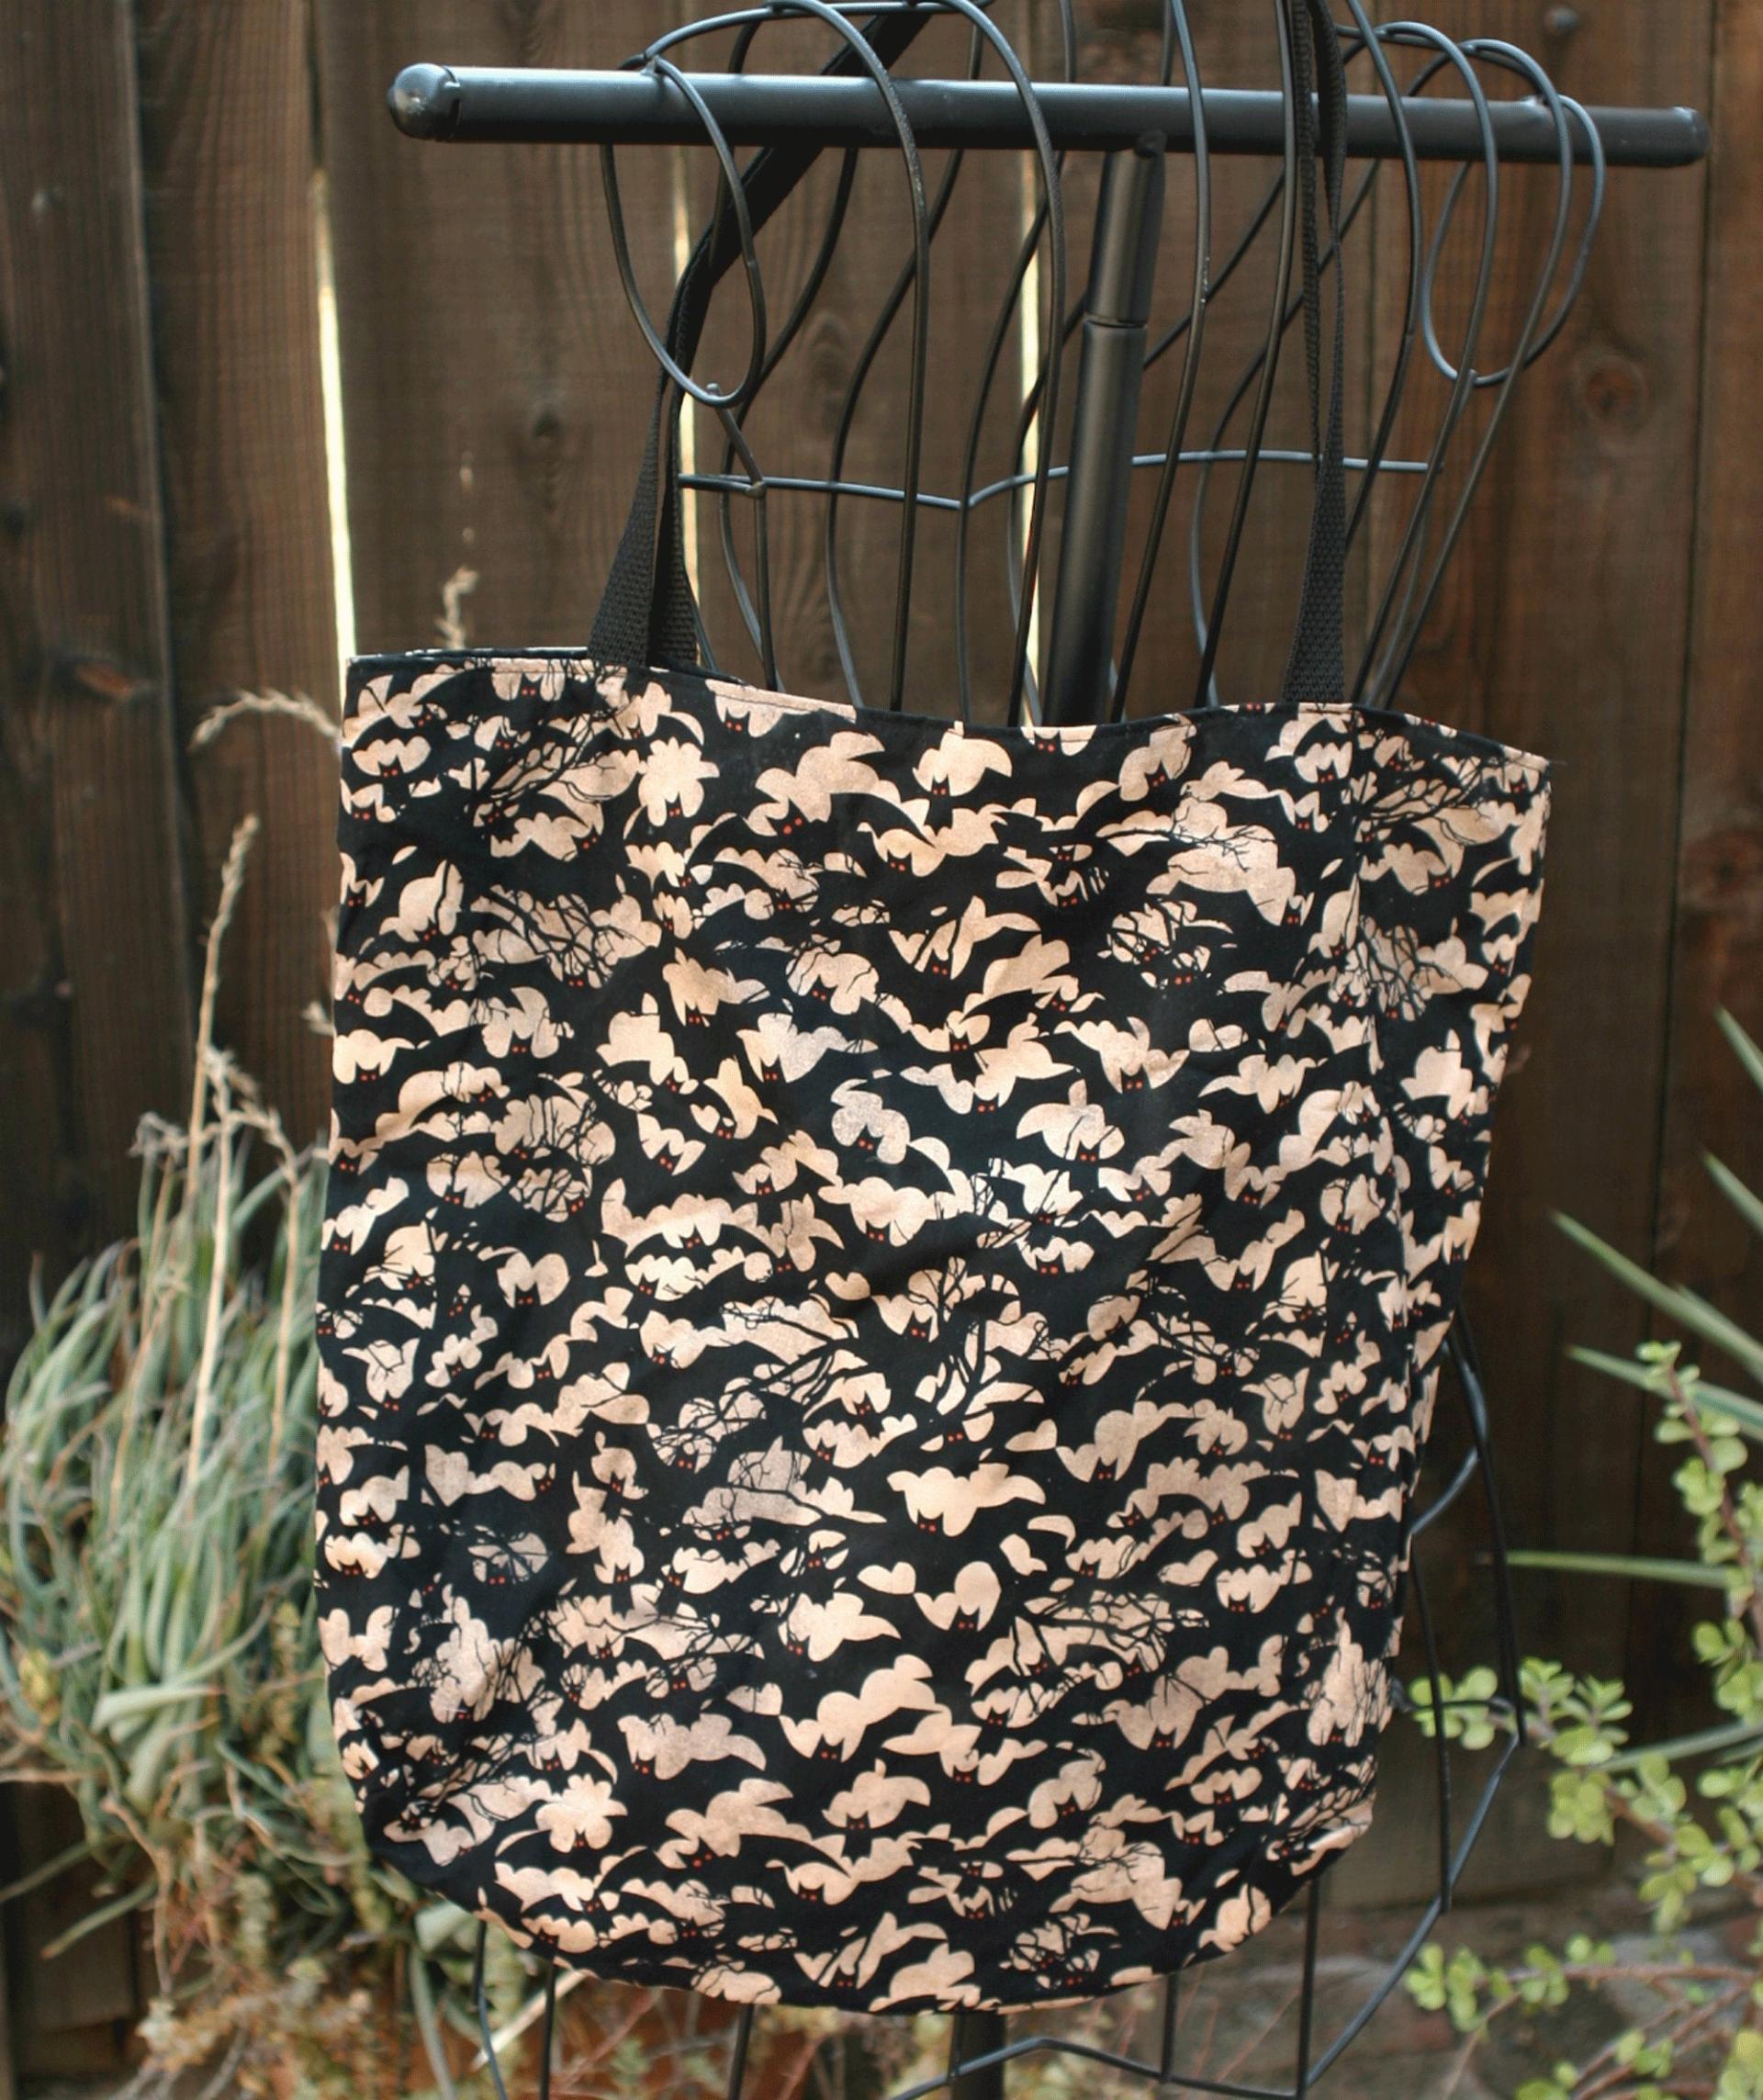 Bats Reversible Black & Tan - Shopping Tote - Grocery Bag - Reversible - Machine Washable - Sturdy Grocery Tote - Spooky